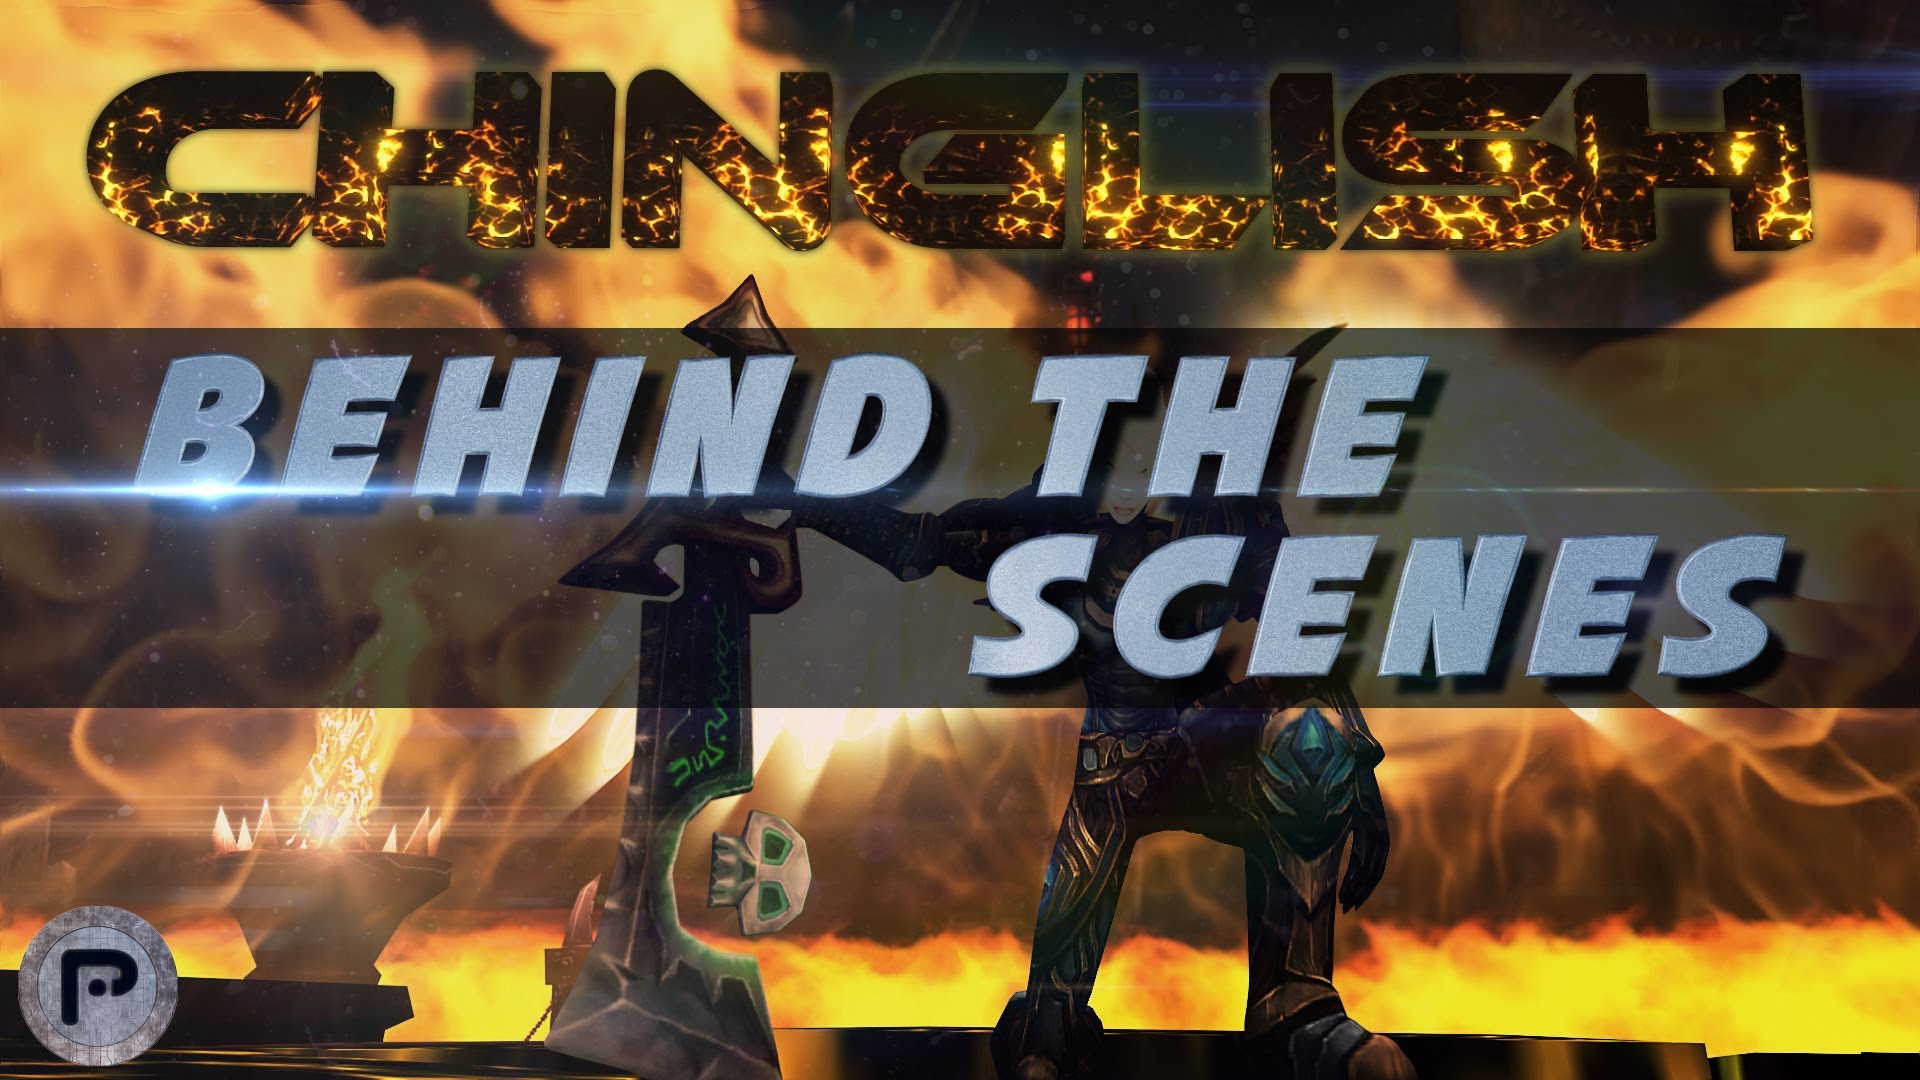 Chinglish Orgrimmar Intro: Behind the Scenes by Psynaps